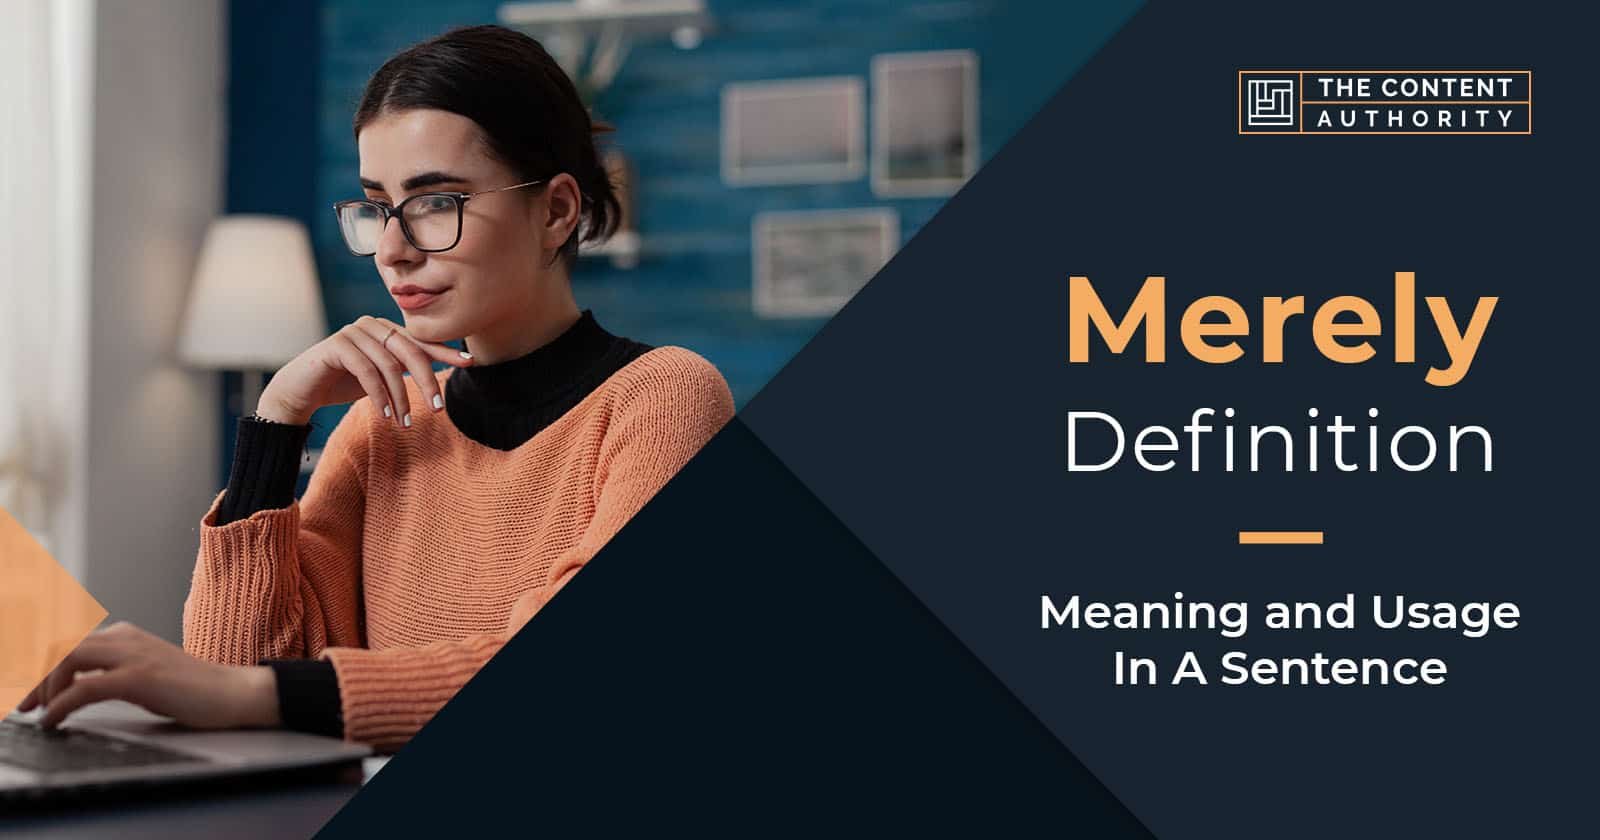 Merely Definition – Meaning And Usage In A Sentence